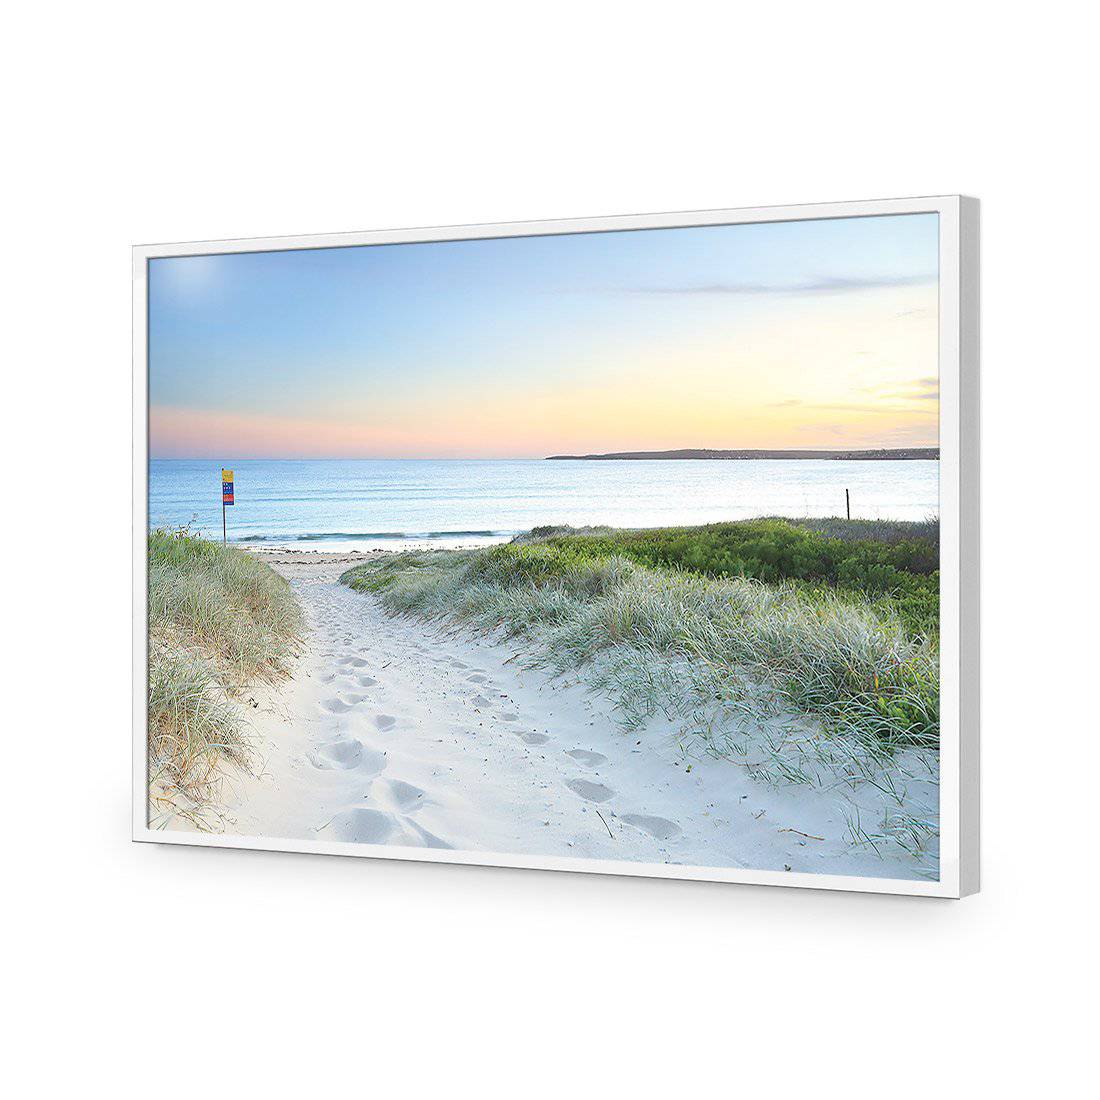 Sand Steps-Acrylic-Wall Art Design-Without Border-Acrylic - White Frame-45x30cm-Wall Art Designs